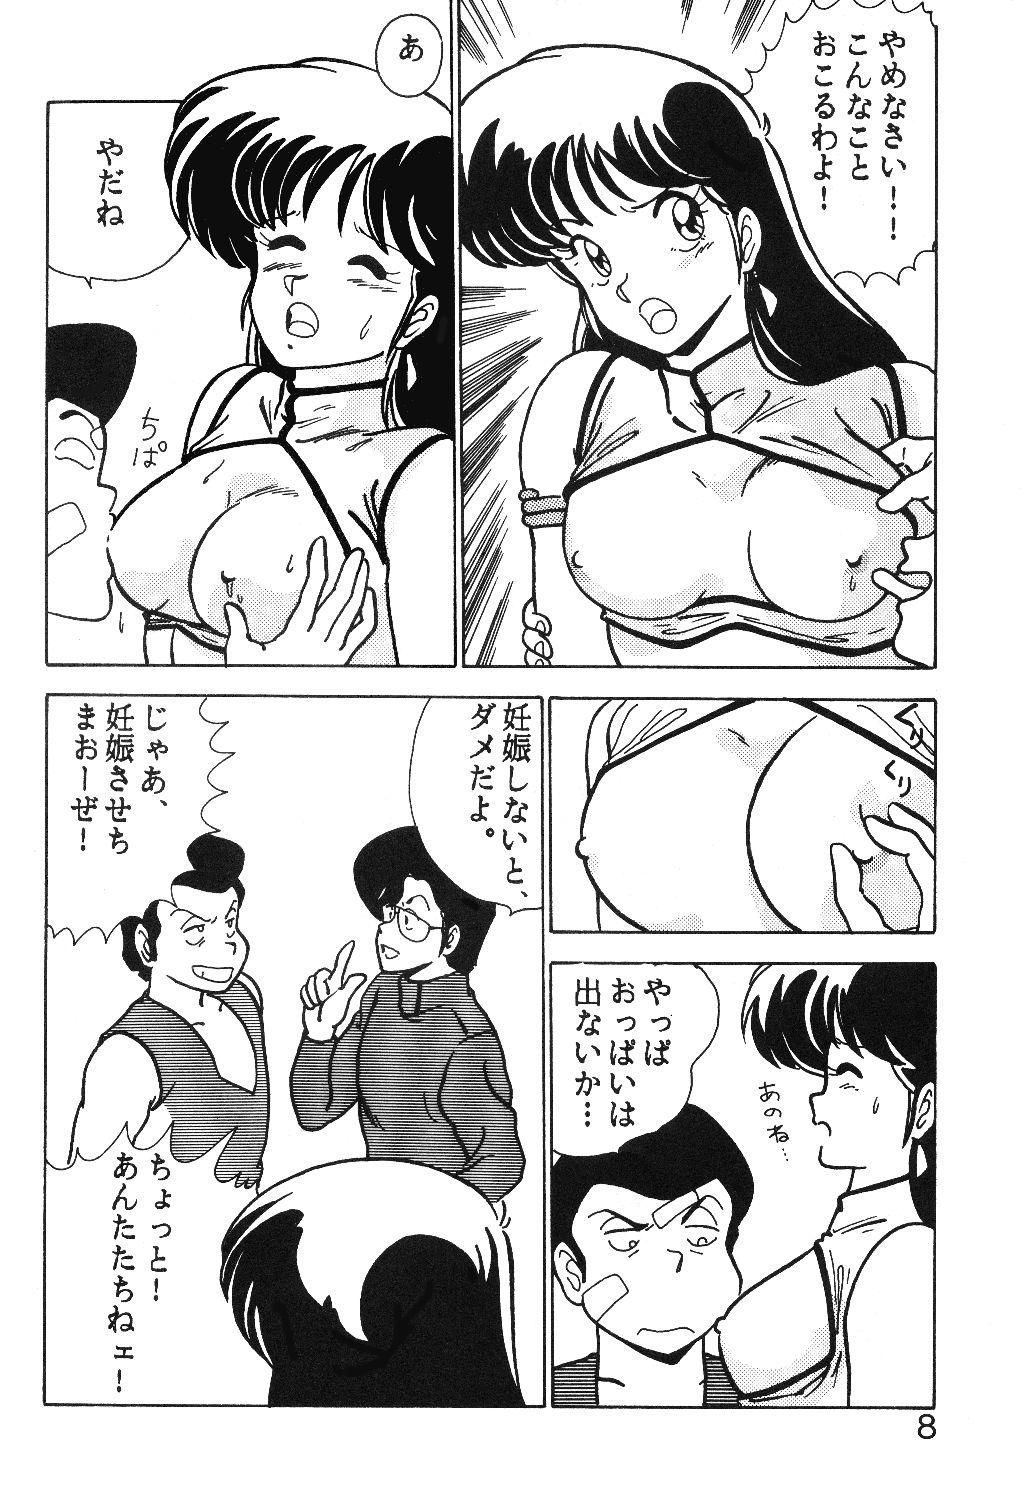 Couch Prescription Vol.1 - Dirty pair Orgy - Page 9